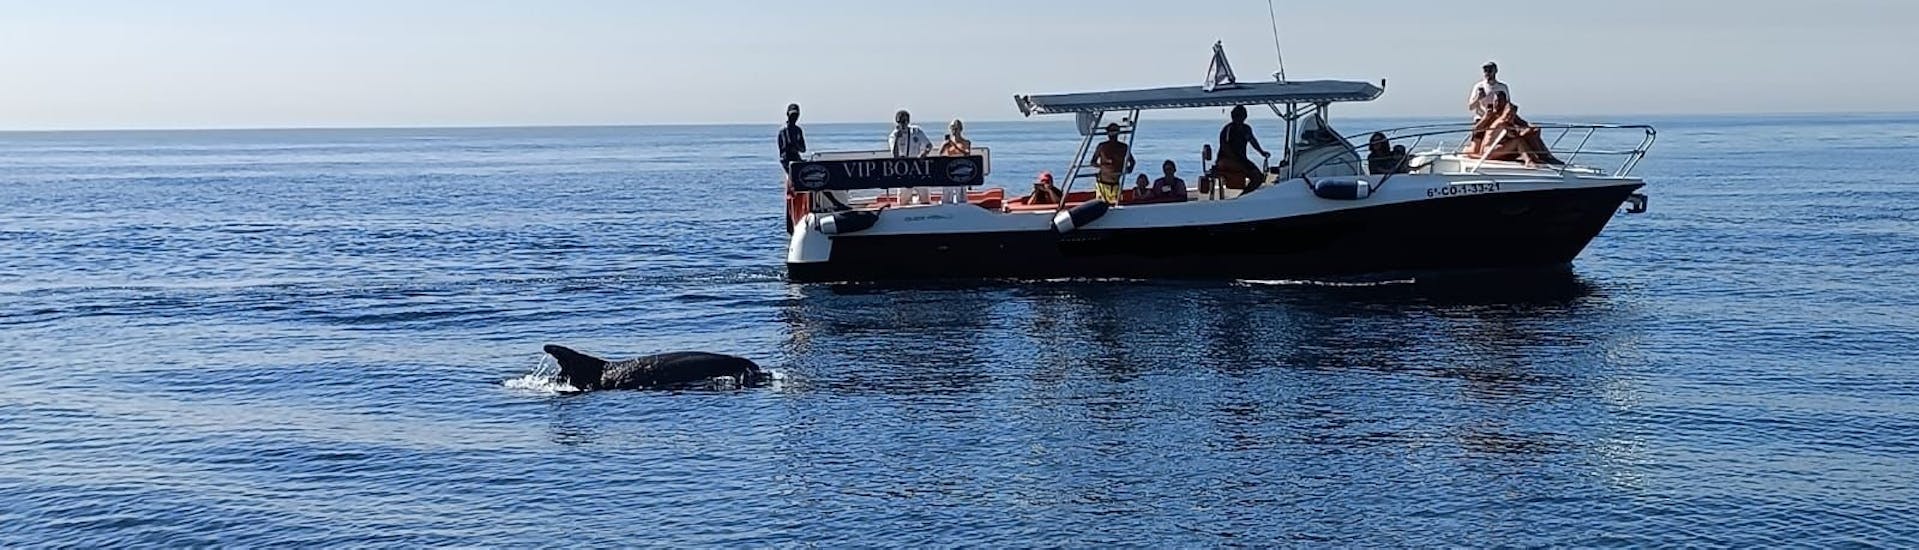 A dolphin is staying close to the boat during the Boat Trip around Costa del Sol with Dolphin Watching with Fuengirola Sea Trips.